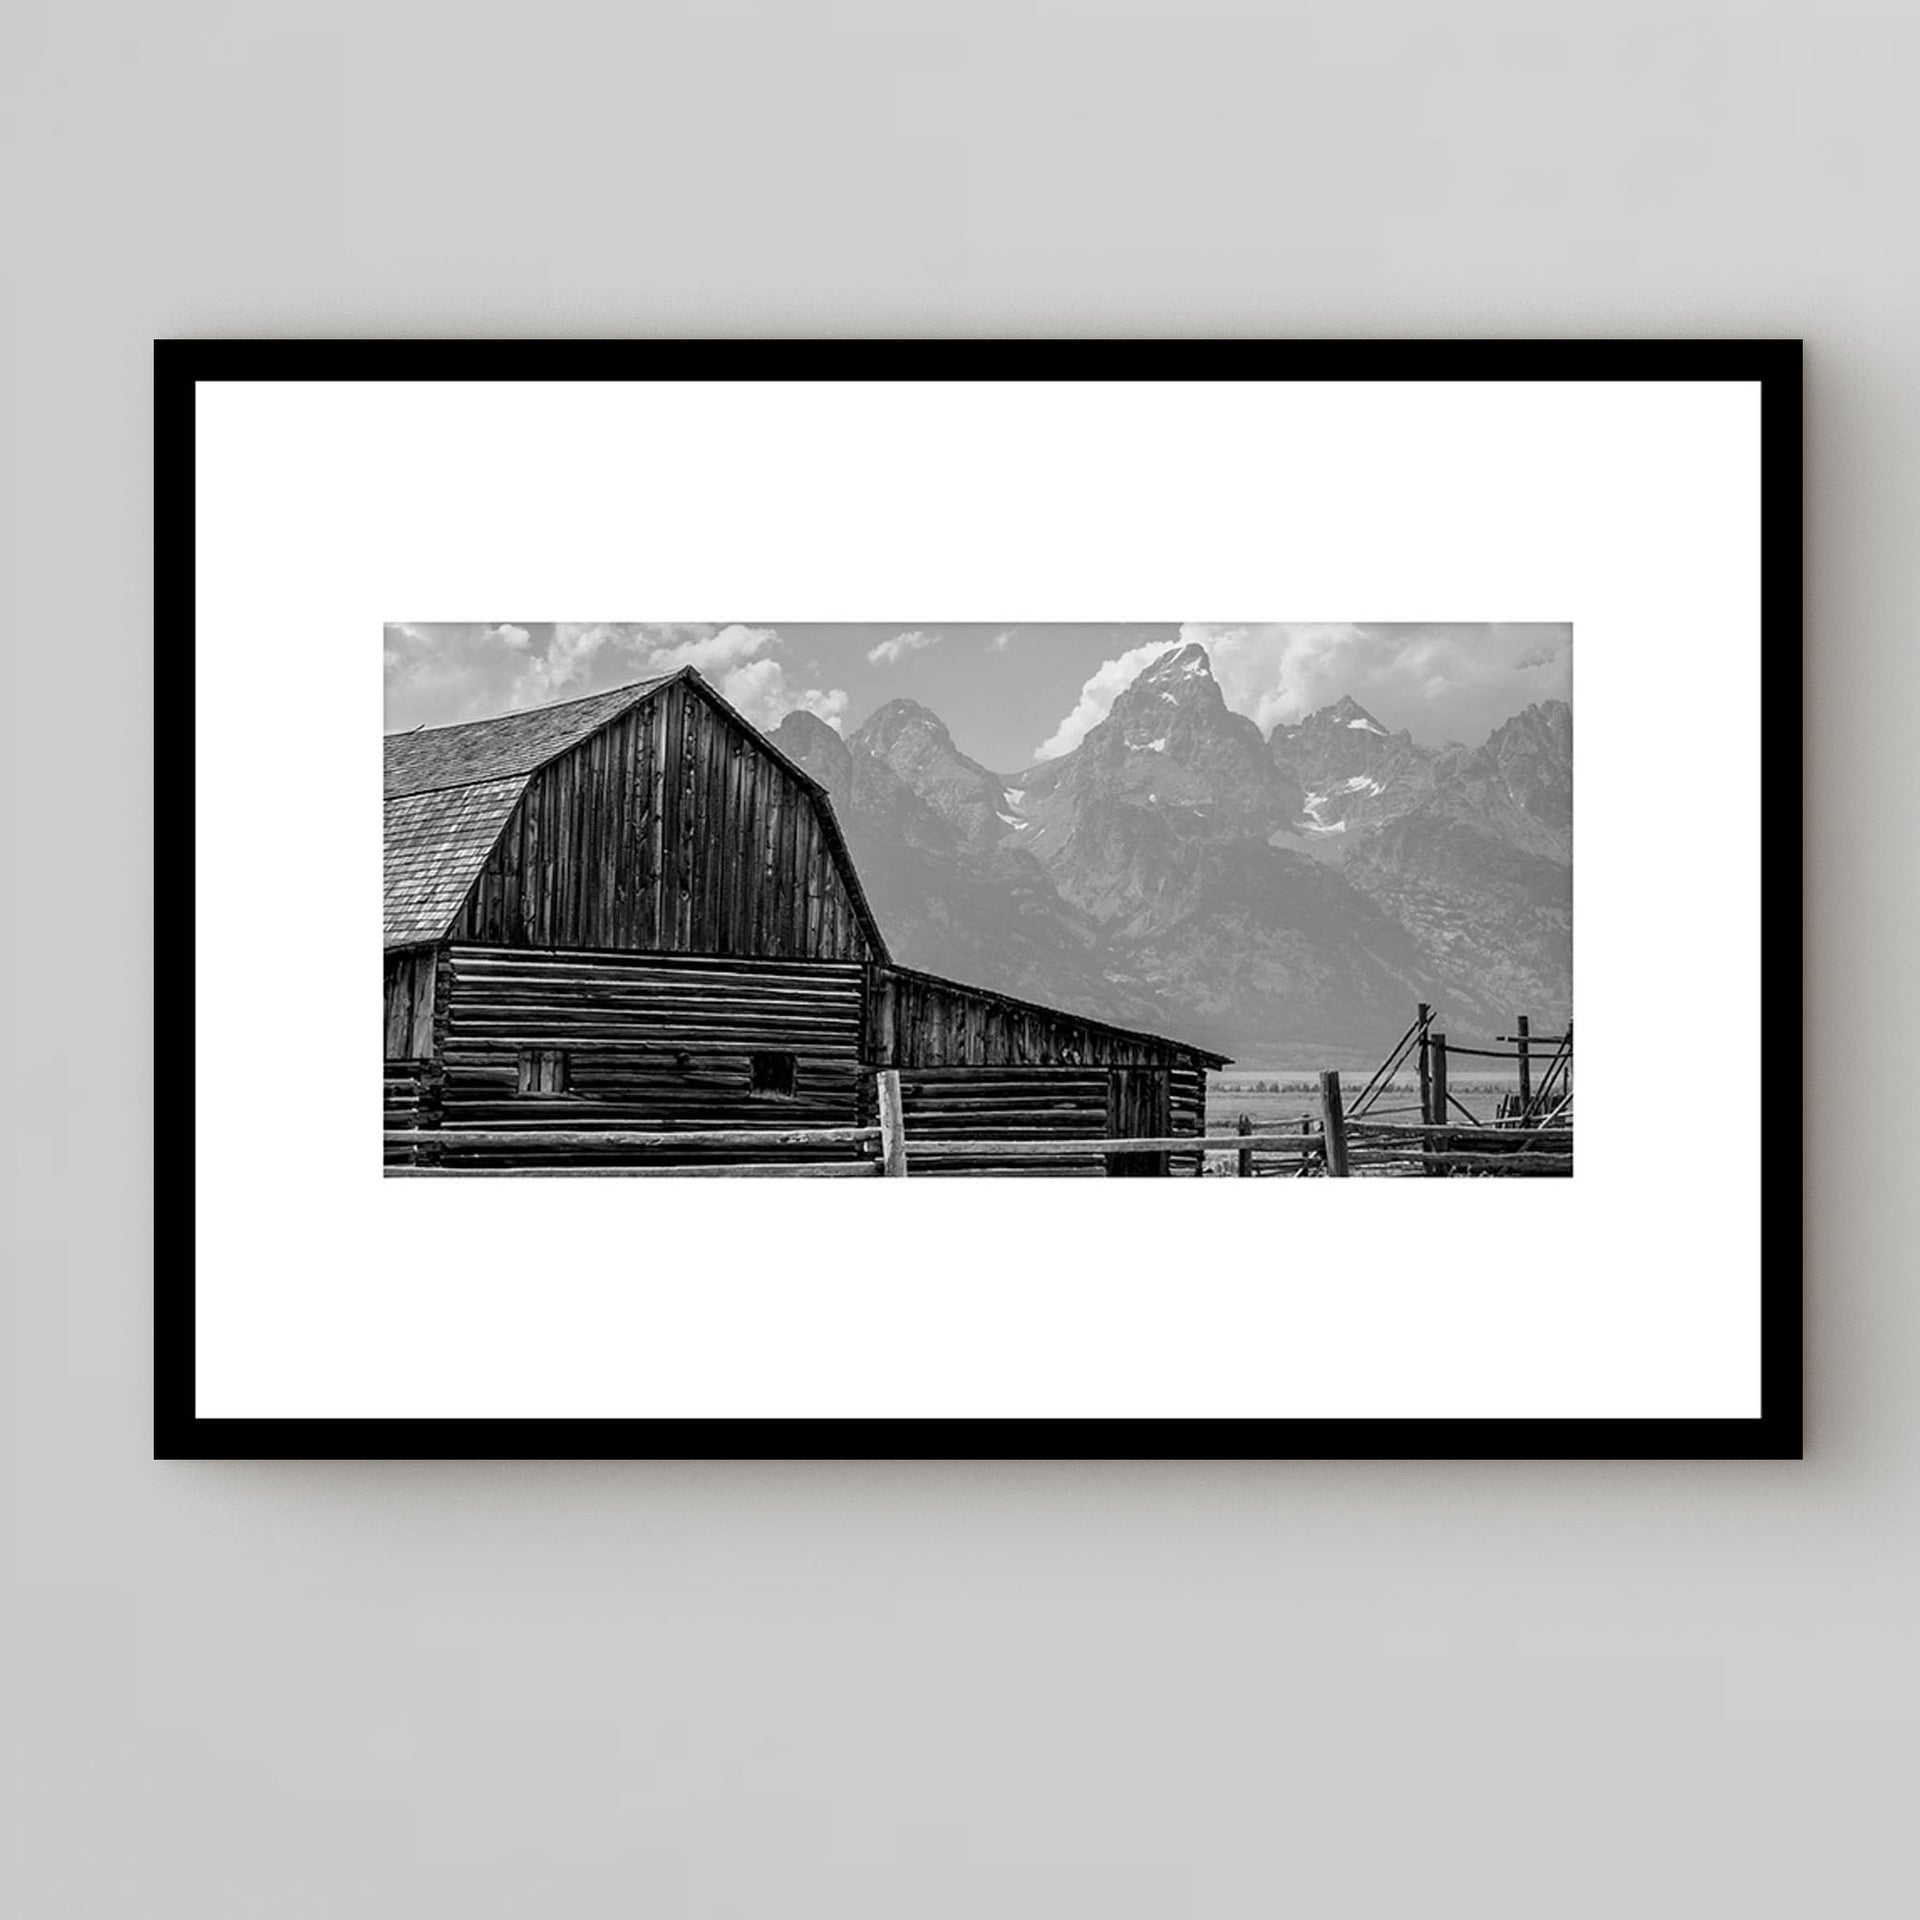 Photography under glass of a barn in a countryside